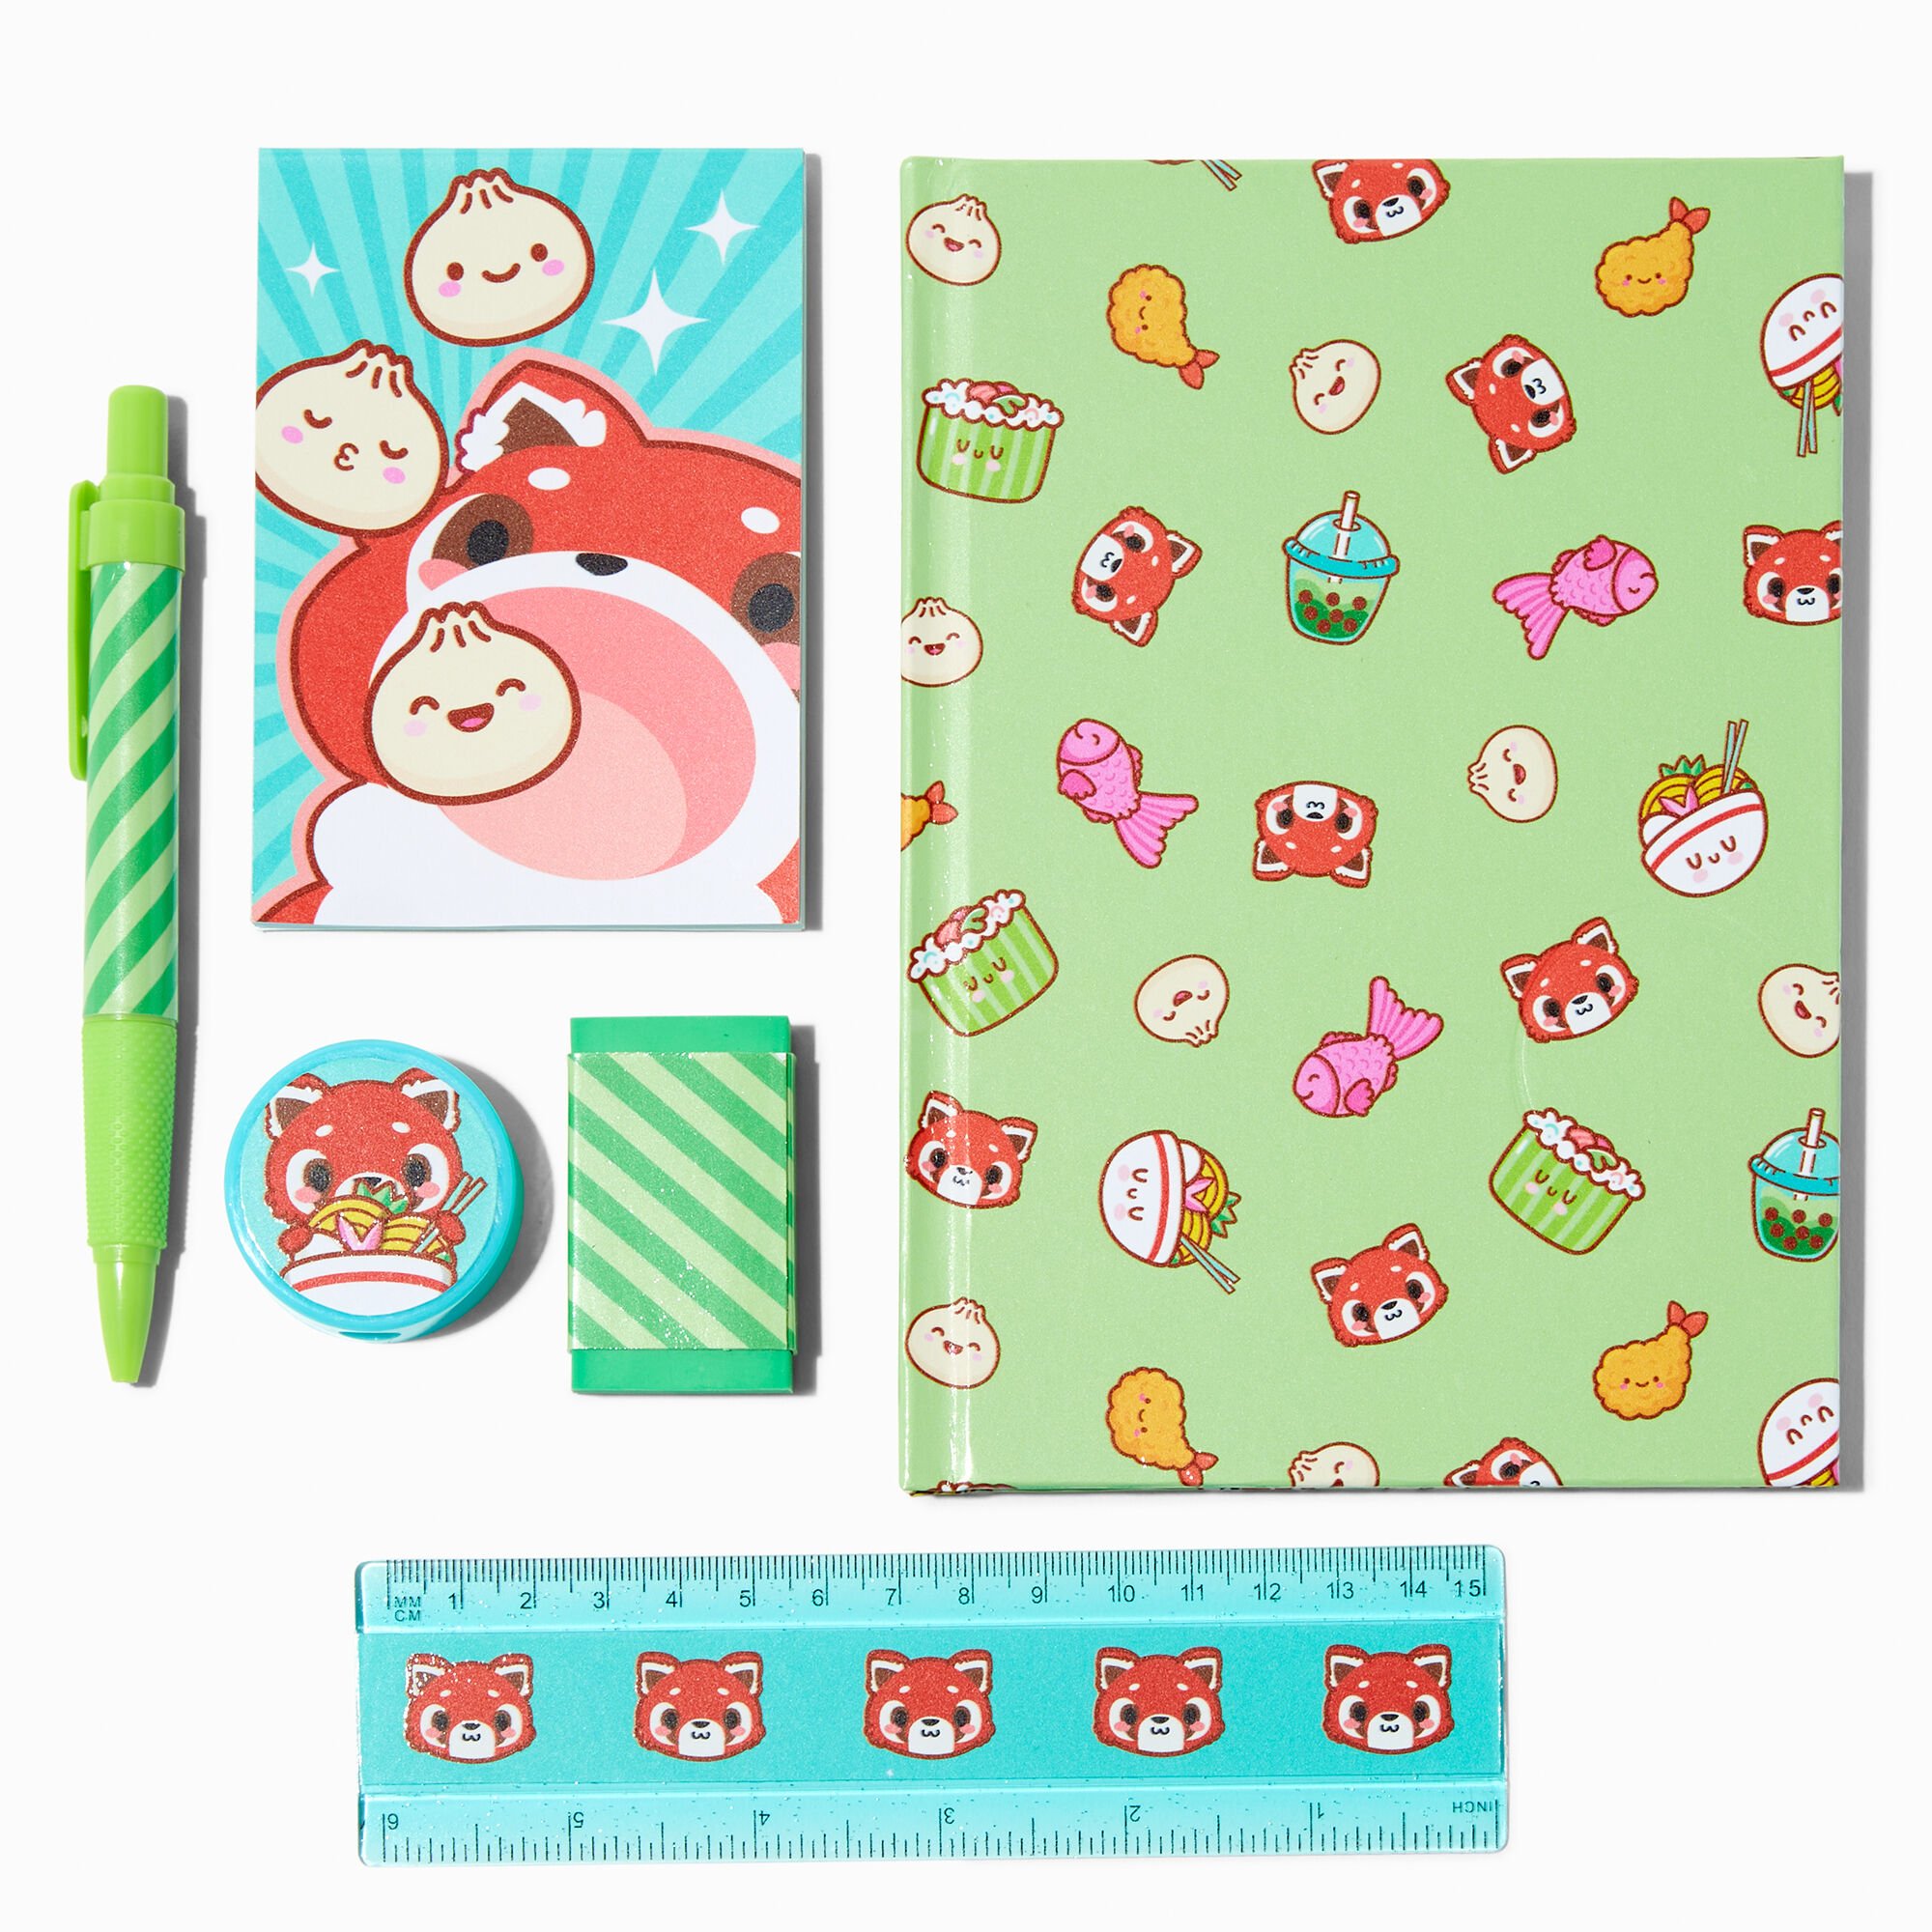 View Claires Panda Stationery Set Red information